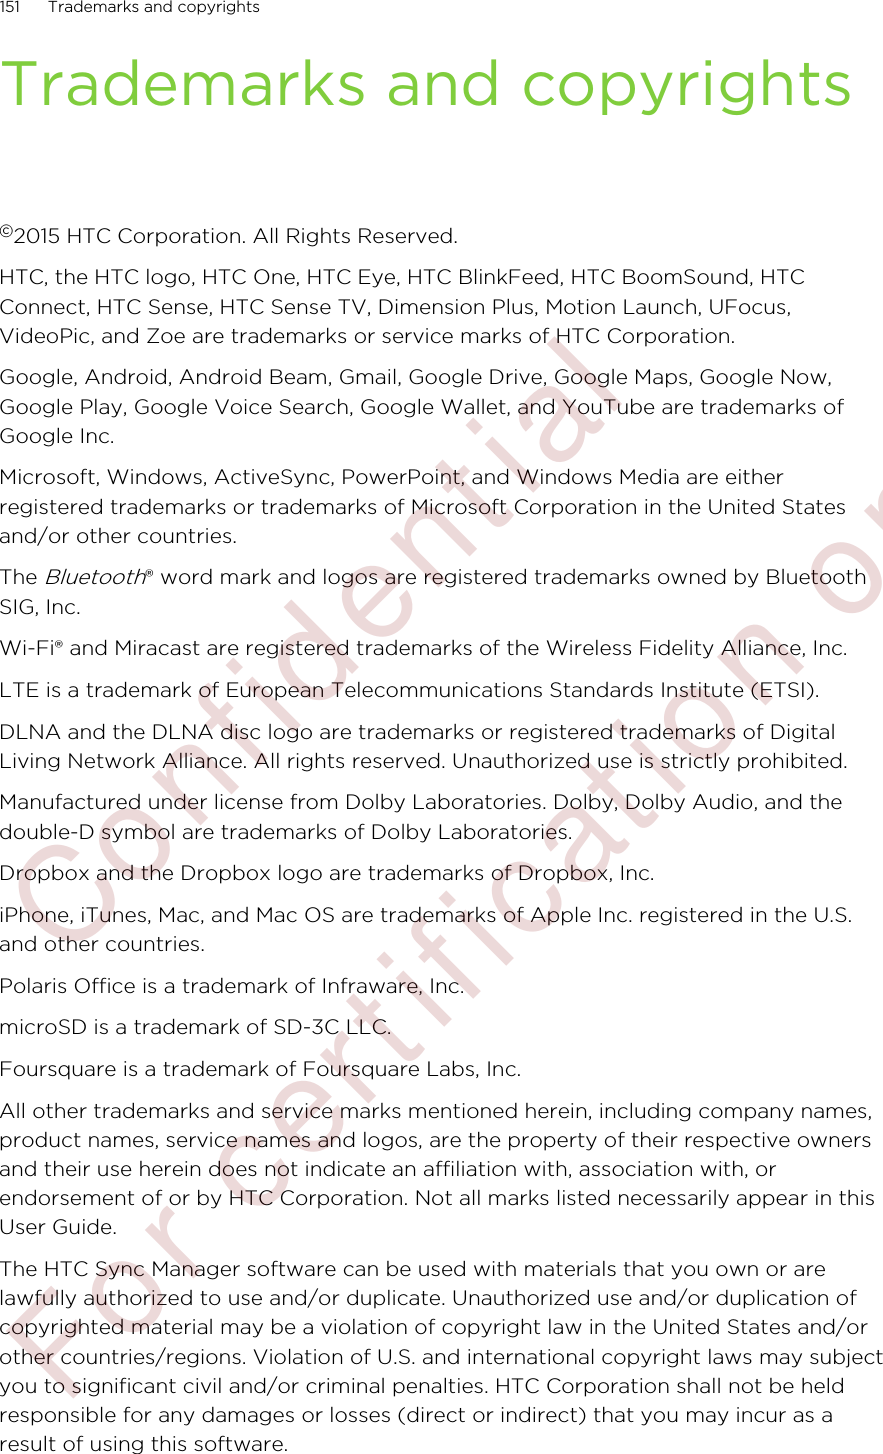 Trademarks and copyrights©2015 HTC Corporation. All Rights Reserved.HTC, the HTC logo, HTC One, HTC Eye, HTC BlinkFeed, HTC BoomSound, HTCConnect, HTC Sense, HTC Sense TV, Dimension Plus, Motion Launch, UFocus,VideoPic, and Zoe are trademarks or service marks of HTC Corporation.Google, Android, Android Beam, Gmail, Google Drive, Google Maps, Google Now,Google Play, Google Voice Search, Google Wallet, and YouTube are trademarks ofGoogle Inc.Microsoft, Windows, ActiveSync, PowerPoint, and Windows Media are eitherregistered trademarks or trademarks of Microsoft Corporation in the United Statesand/or other countries.The Bluetooth® word mark and logos are registered trademarks owned by BluetoothSIG, Inc.Wi-Fi® and Miracast are registered trademarks of the Wireless Fidelity Alliance, Inc.LTE is a trademark of European Telecommunications Standards Institute (ETSI).DLNA and the DLNA disc logo are trademarks or registered trademarks of DigitalLiving Network Alliance. All rights reserved. Unauthorized use is strictly prohibited.Manufactured under license from Dolby Laboratories. Dolby, Dolby Audio, and thedouble-D symbol are trademarks of Dolby Laboratories.Dropbox and the Dropbox logo are trademarks of Dropbox, Inc.iPhone, iTunes, Mac, and Mac OS are trademarks of Apple Inc. registered in the U.S.and other countries.Polaris Office is a trademark of Infraware, Inc.microSD is a trademark of SD-3C LLC.Foursquare is a trademark of Foursquare Labs, Inc.All other trademarks and service marks mentioned herein, including company names,product names, service names and logos, are the property of their respective ownersand their use herein does not indicate an affiliation with, association with, orendorsement of or by HTC Corporation. Not all marks listed necessarily appear in thisUser Guide.The HTC Sync Manager software can be used with materials that you own or arelawfully authorized to use and/or duplicate. Unauthorized use and/or duplication ofcopyrighted material may be a violation of copyright law in the United States and/orother countries/regions. Violation of U.S. and international copyright laws may subjectyou to significant civil and/or criminal penalties. HTC Corporation shall not be heldresponsible for any damages or losses (direct or indirect) that you may incur as aresult of using this software.151 Trademarks and copyrights        Confidential  For certification only